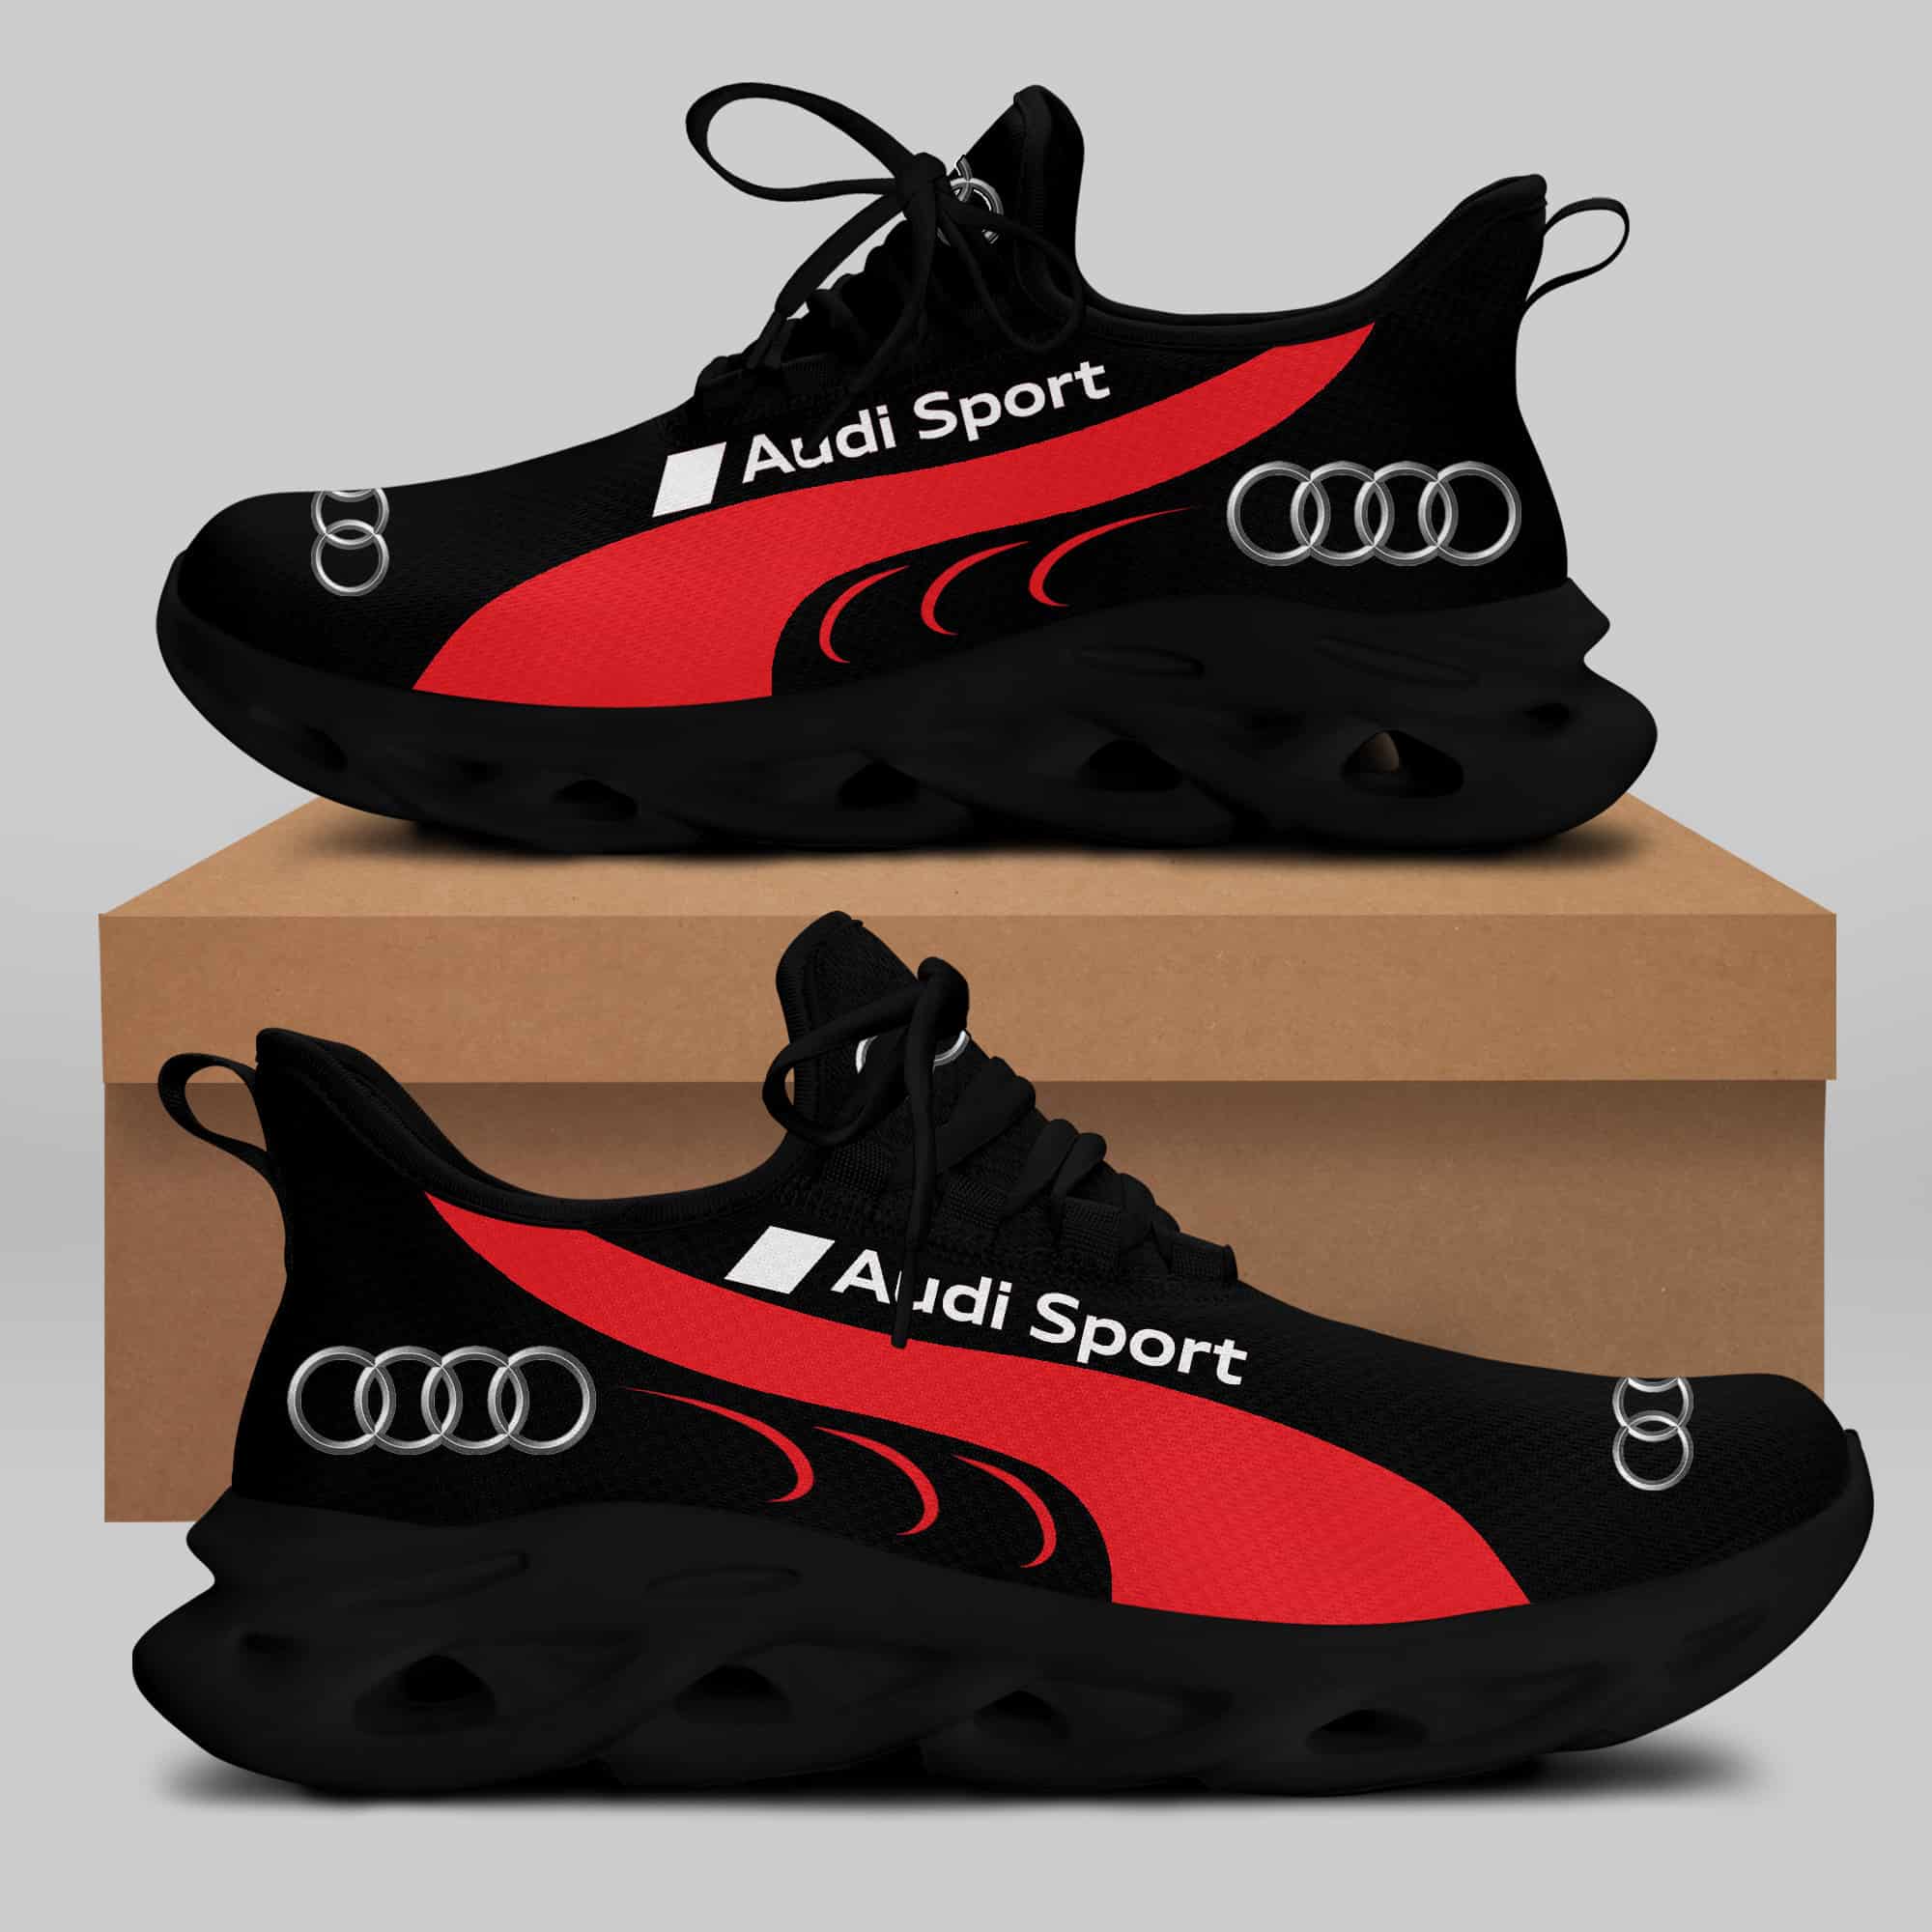 Audi Sport Running Shoes Max Soul Shoes Sneakers Ver 3 1